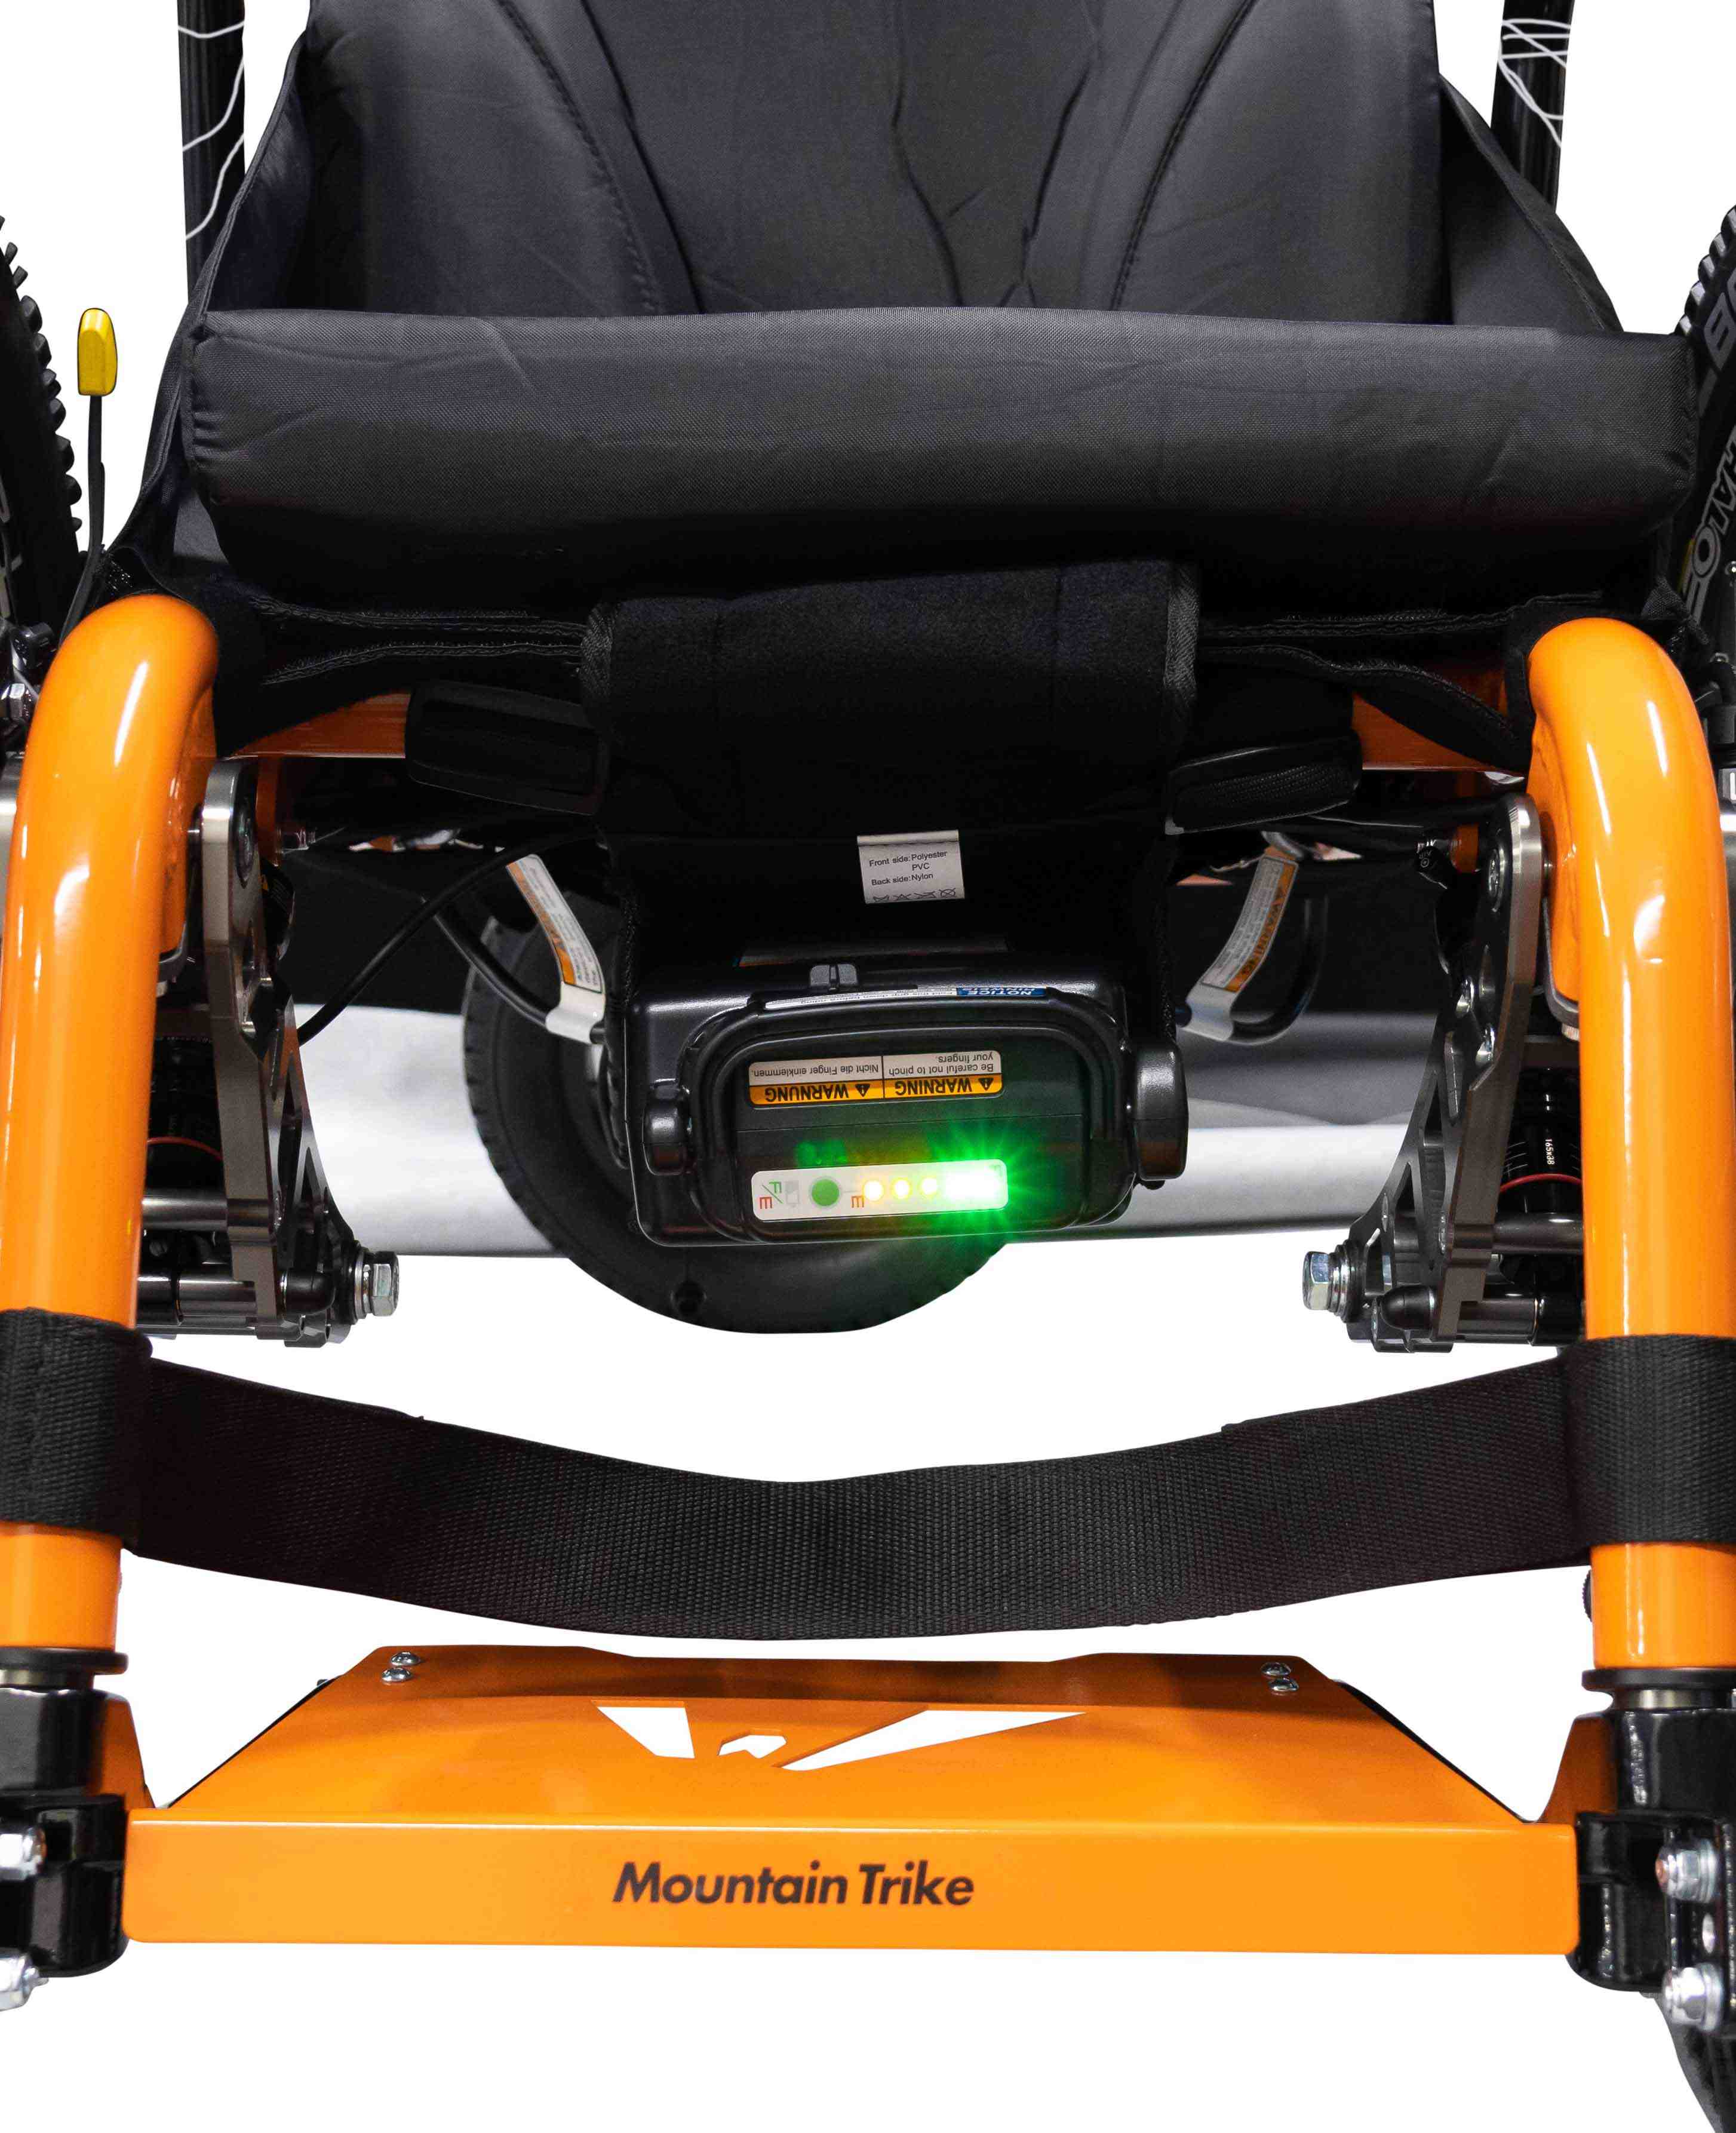 SDMotion Trike battery and travel information